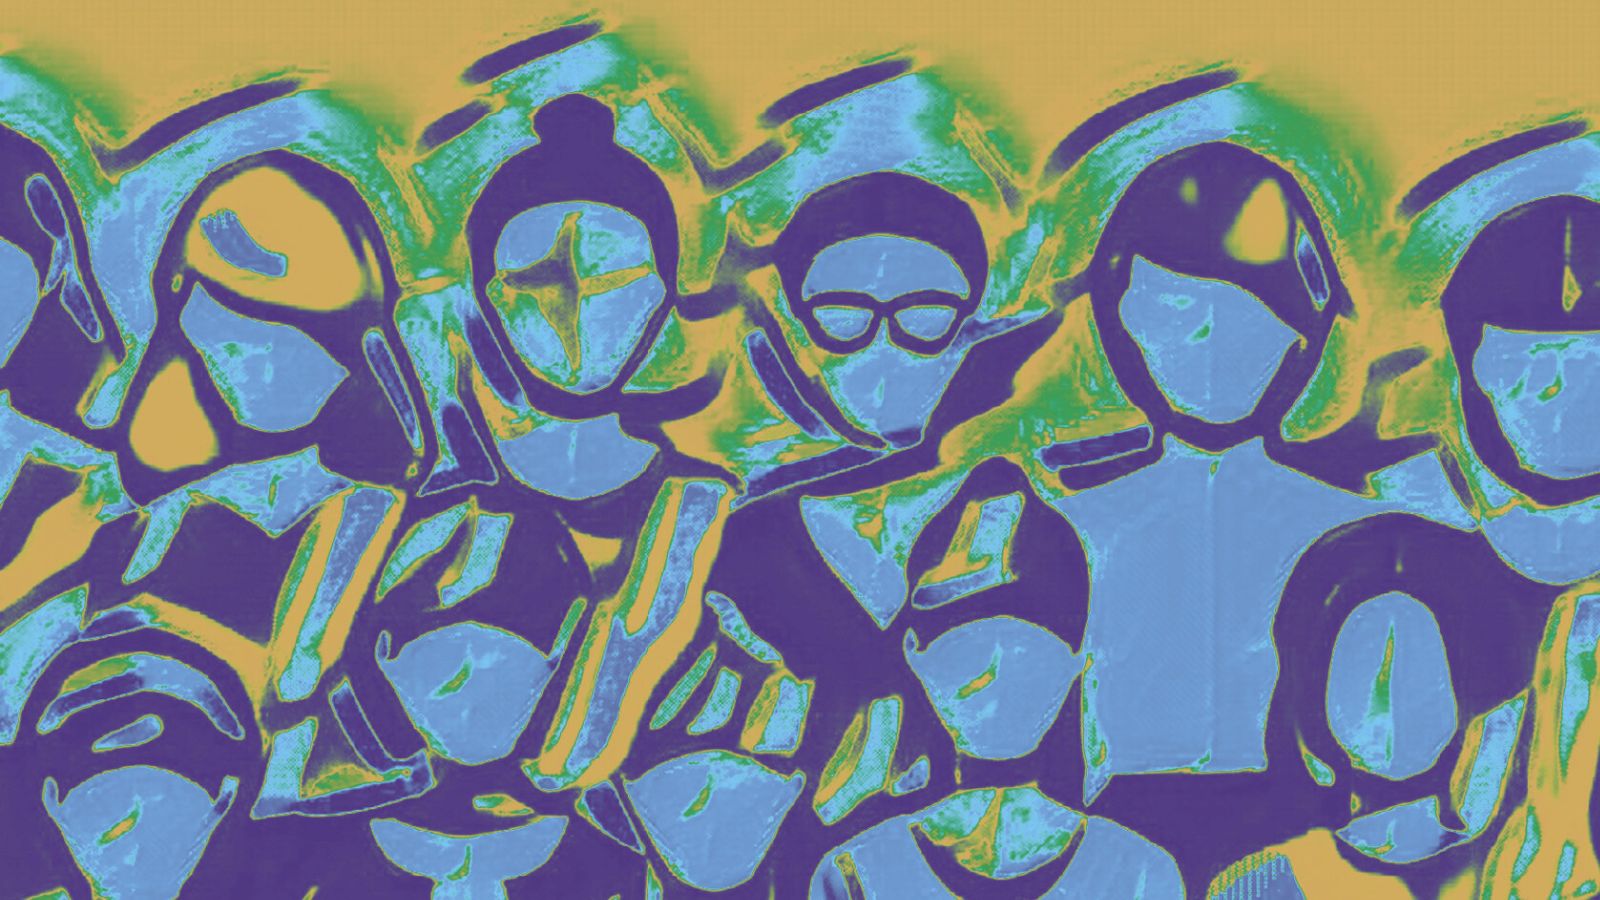 A crowd of blue people on a yellow background